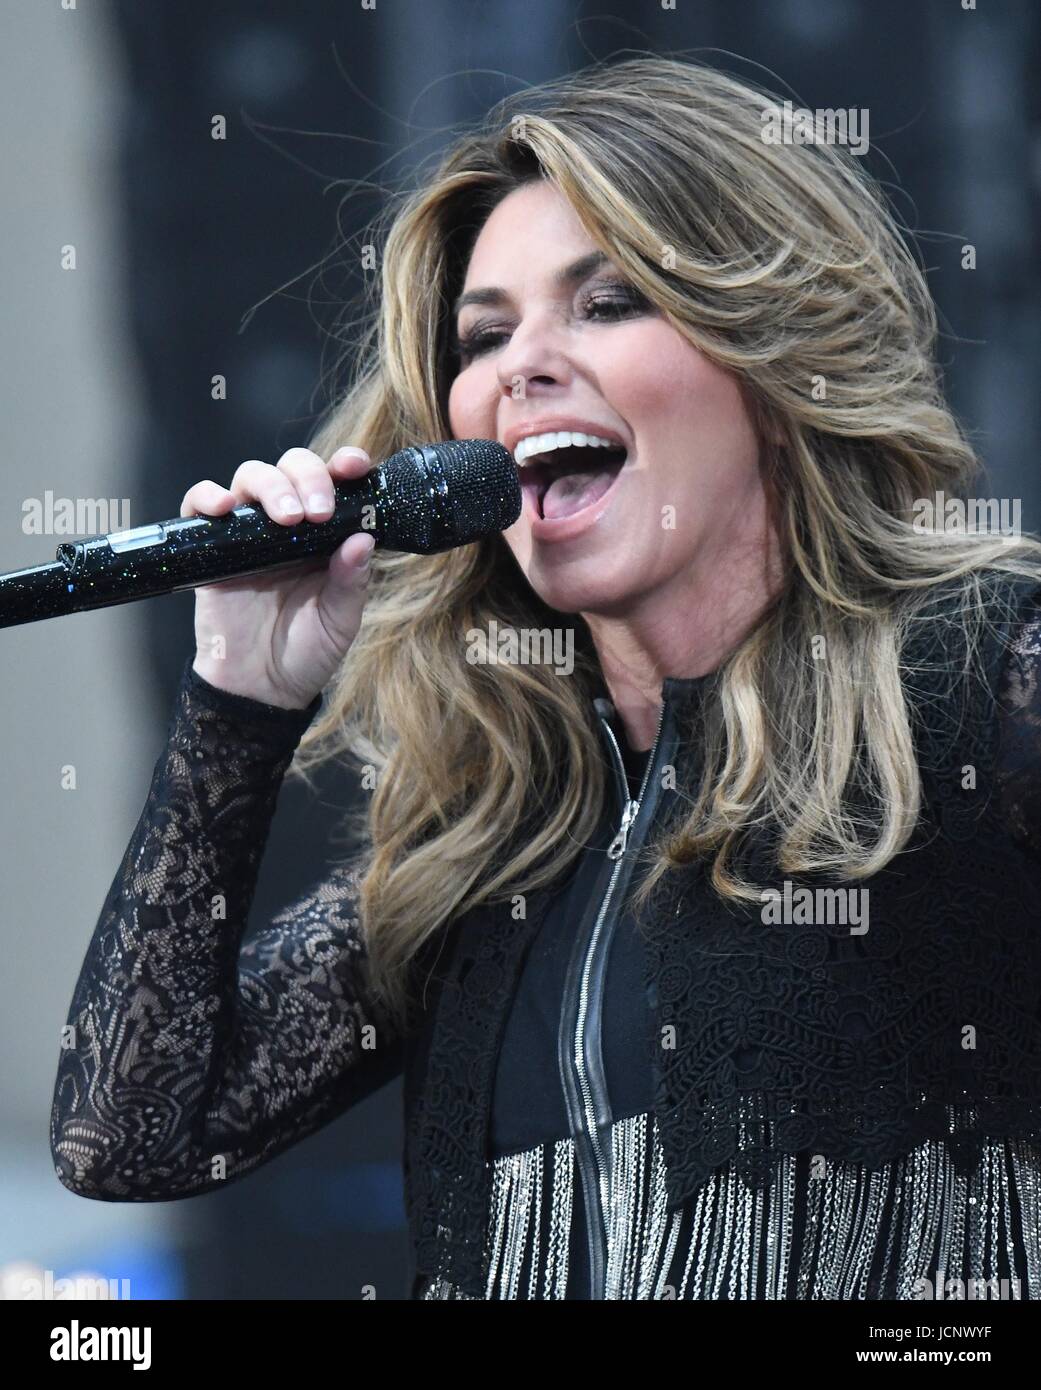 New York, NY, USA. 16th June, 2017. Shania Twain on stage for NBC Today Show Concert with Shania Twain, Rockefeller Plaza, New York, NY June 16, 2017. Credit: Lee/Everett Collection/Alamy Live News Stock Photo